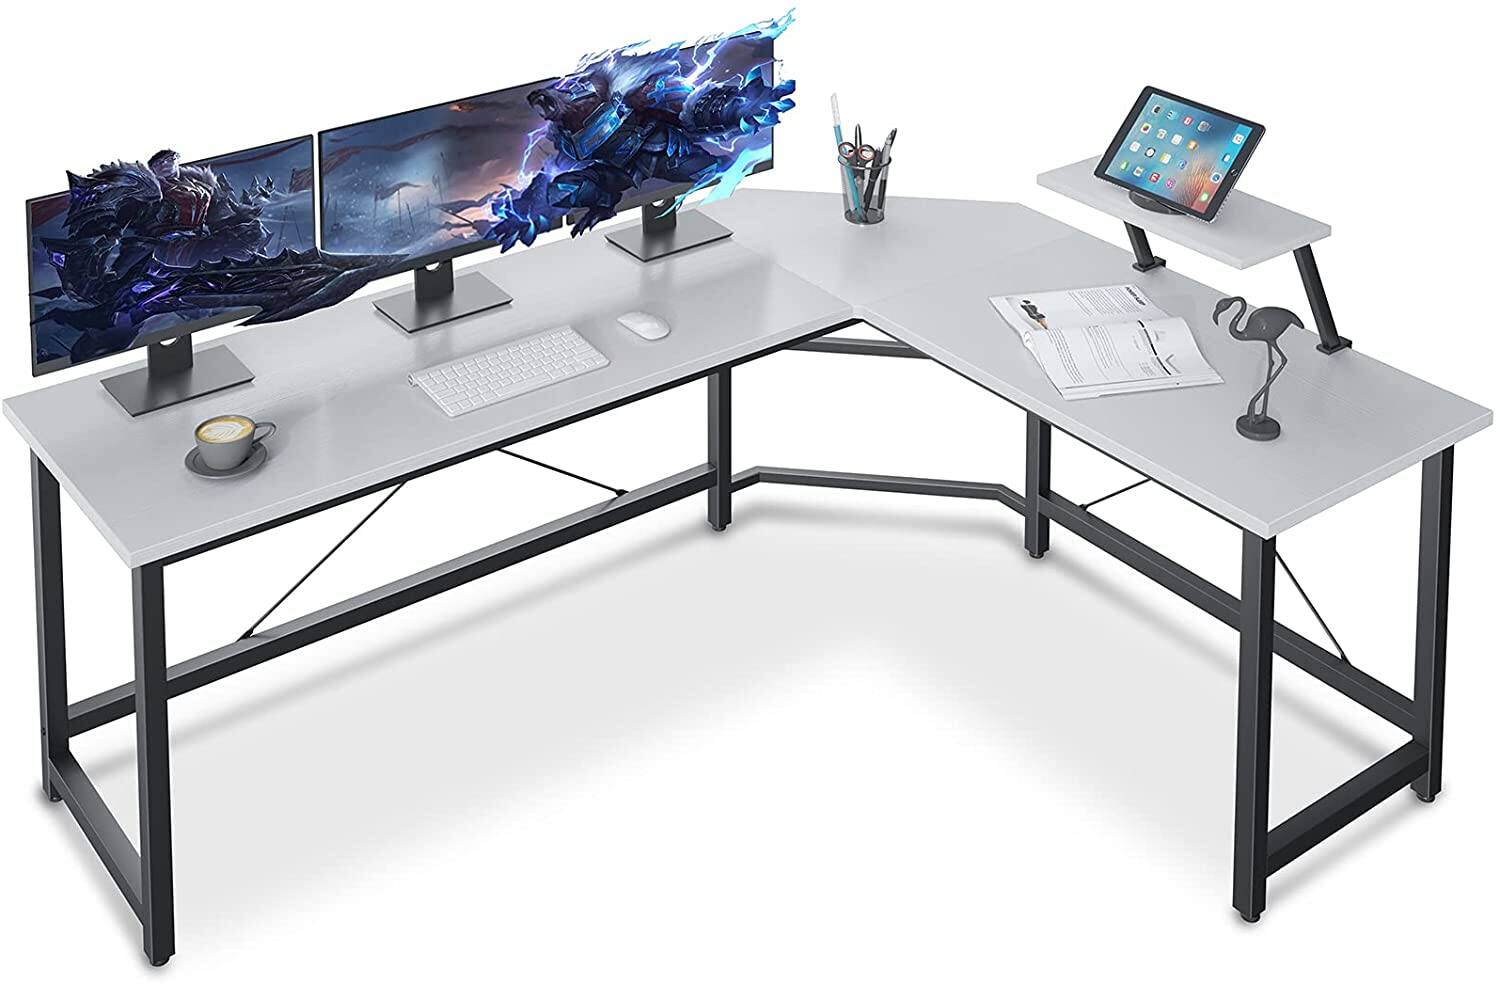 30% OFF 59" Reversible L Shaped Desk for $106.39+Free Shpping with PRIME